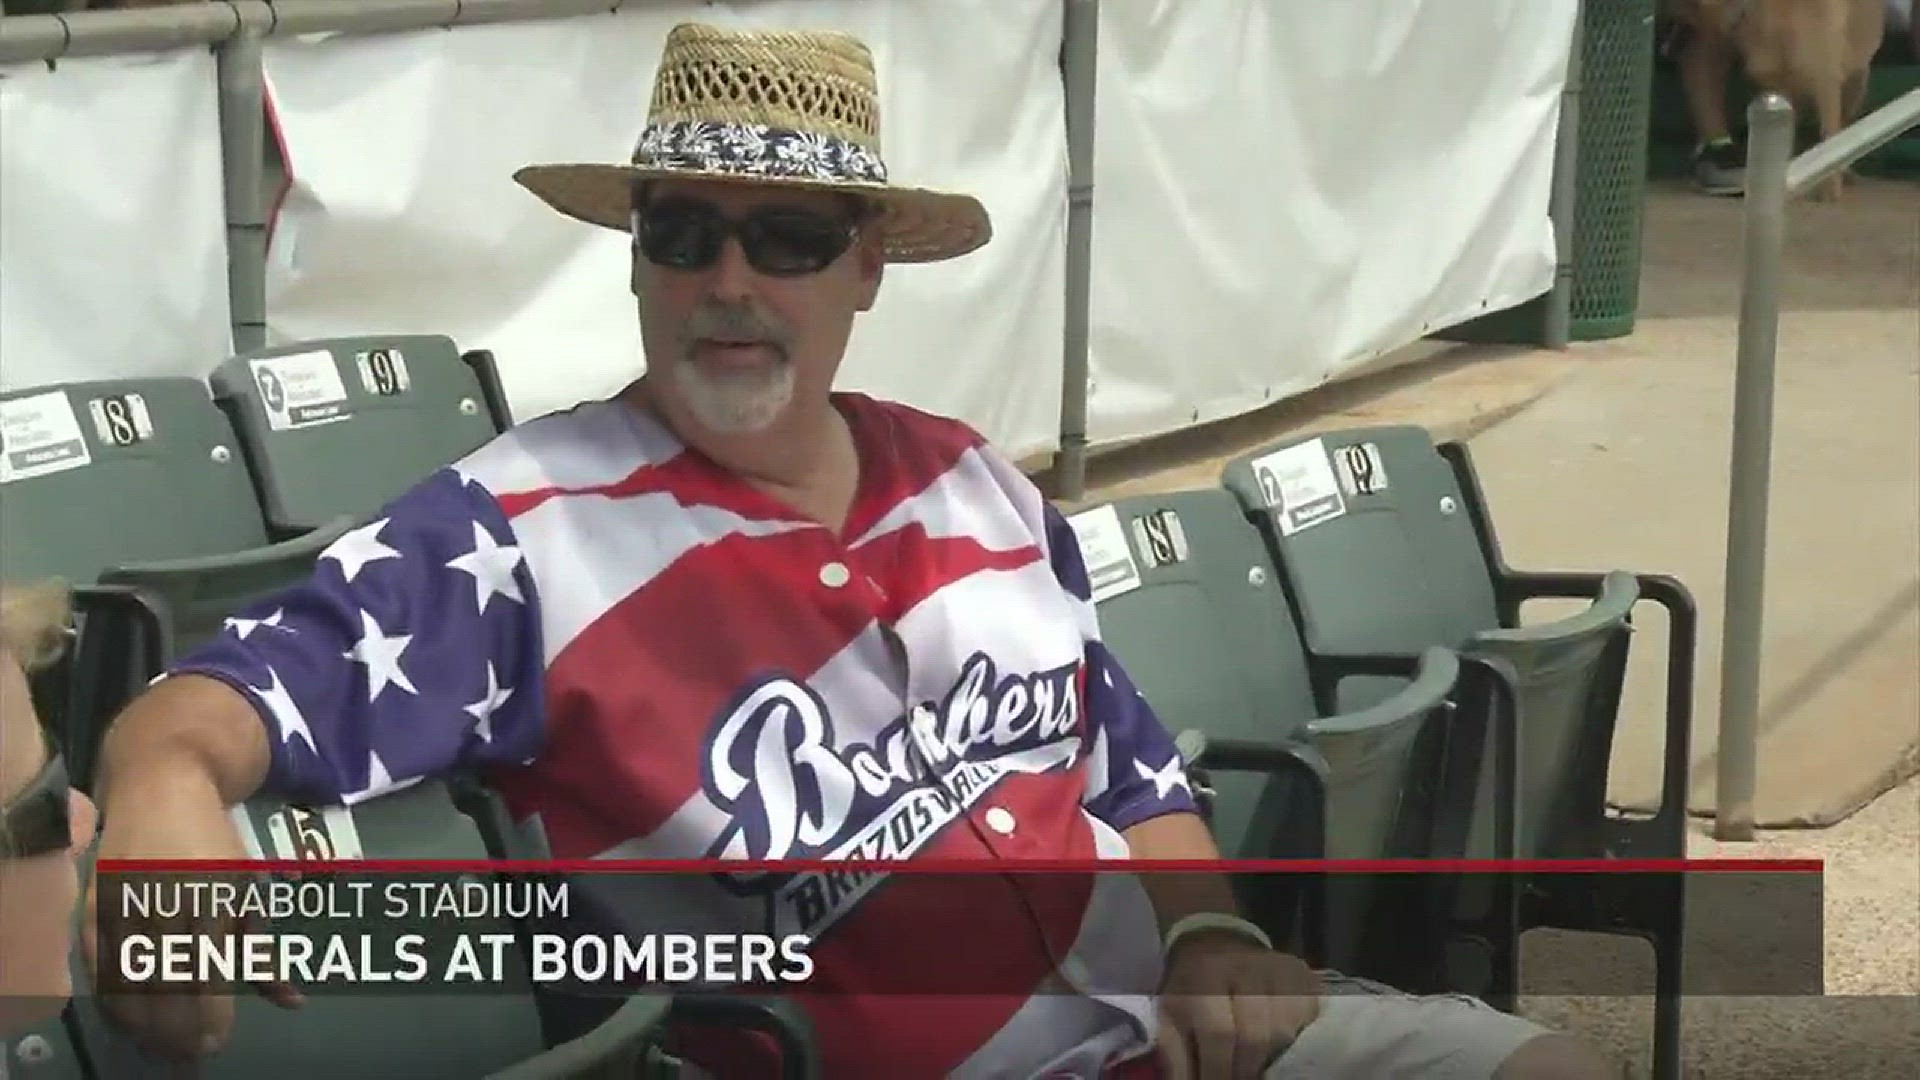 The Brazos Valley Bombers were victorious on the 4th of July, 10-2 over the Victoria Generals.